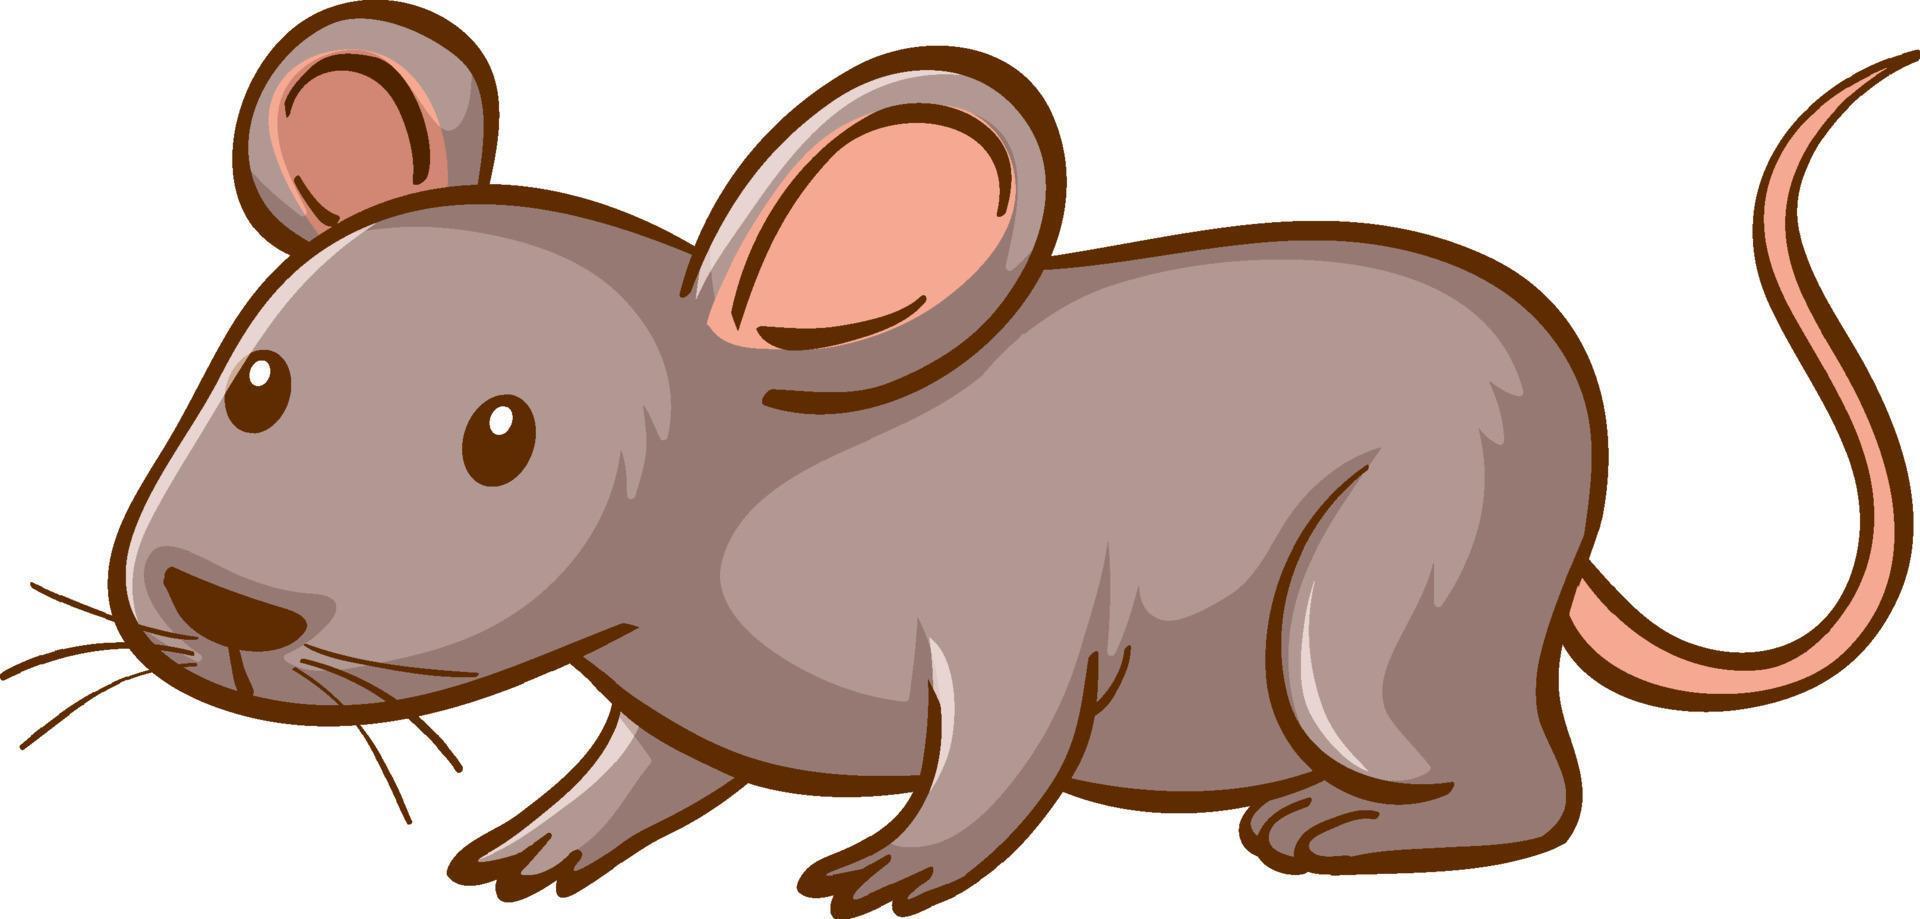 Mouse animal cartoon on white background vector